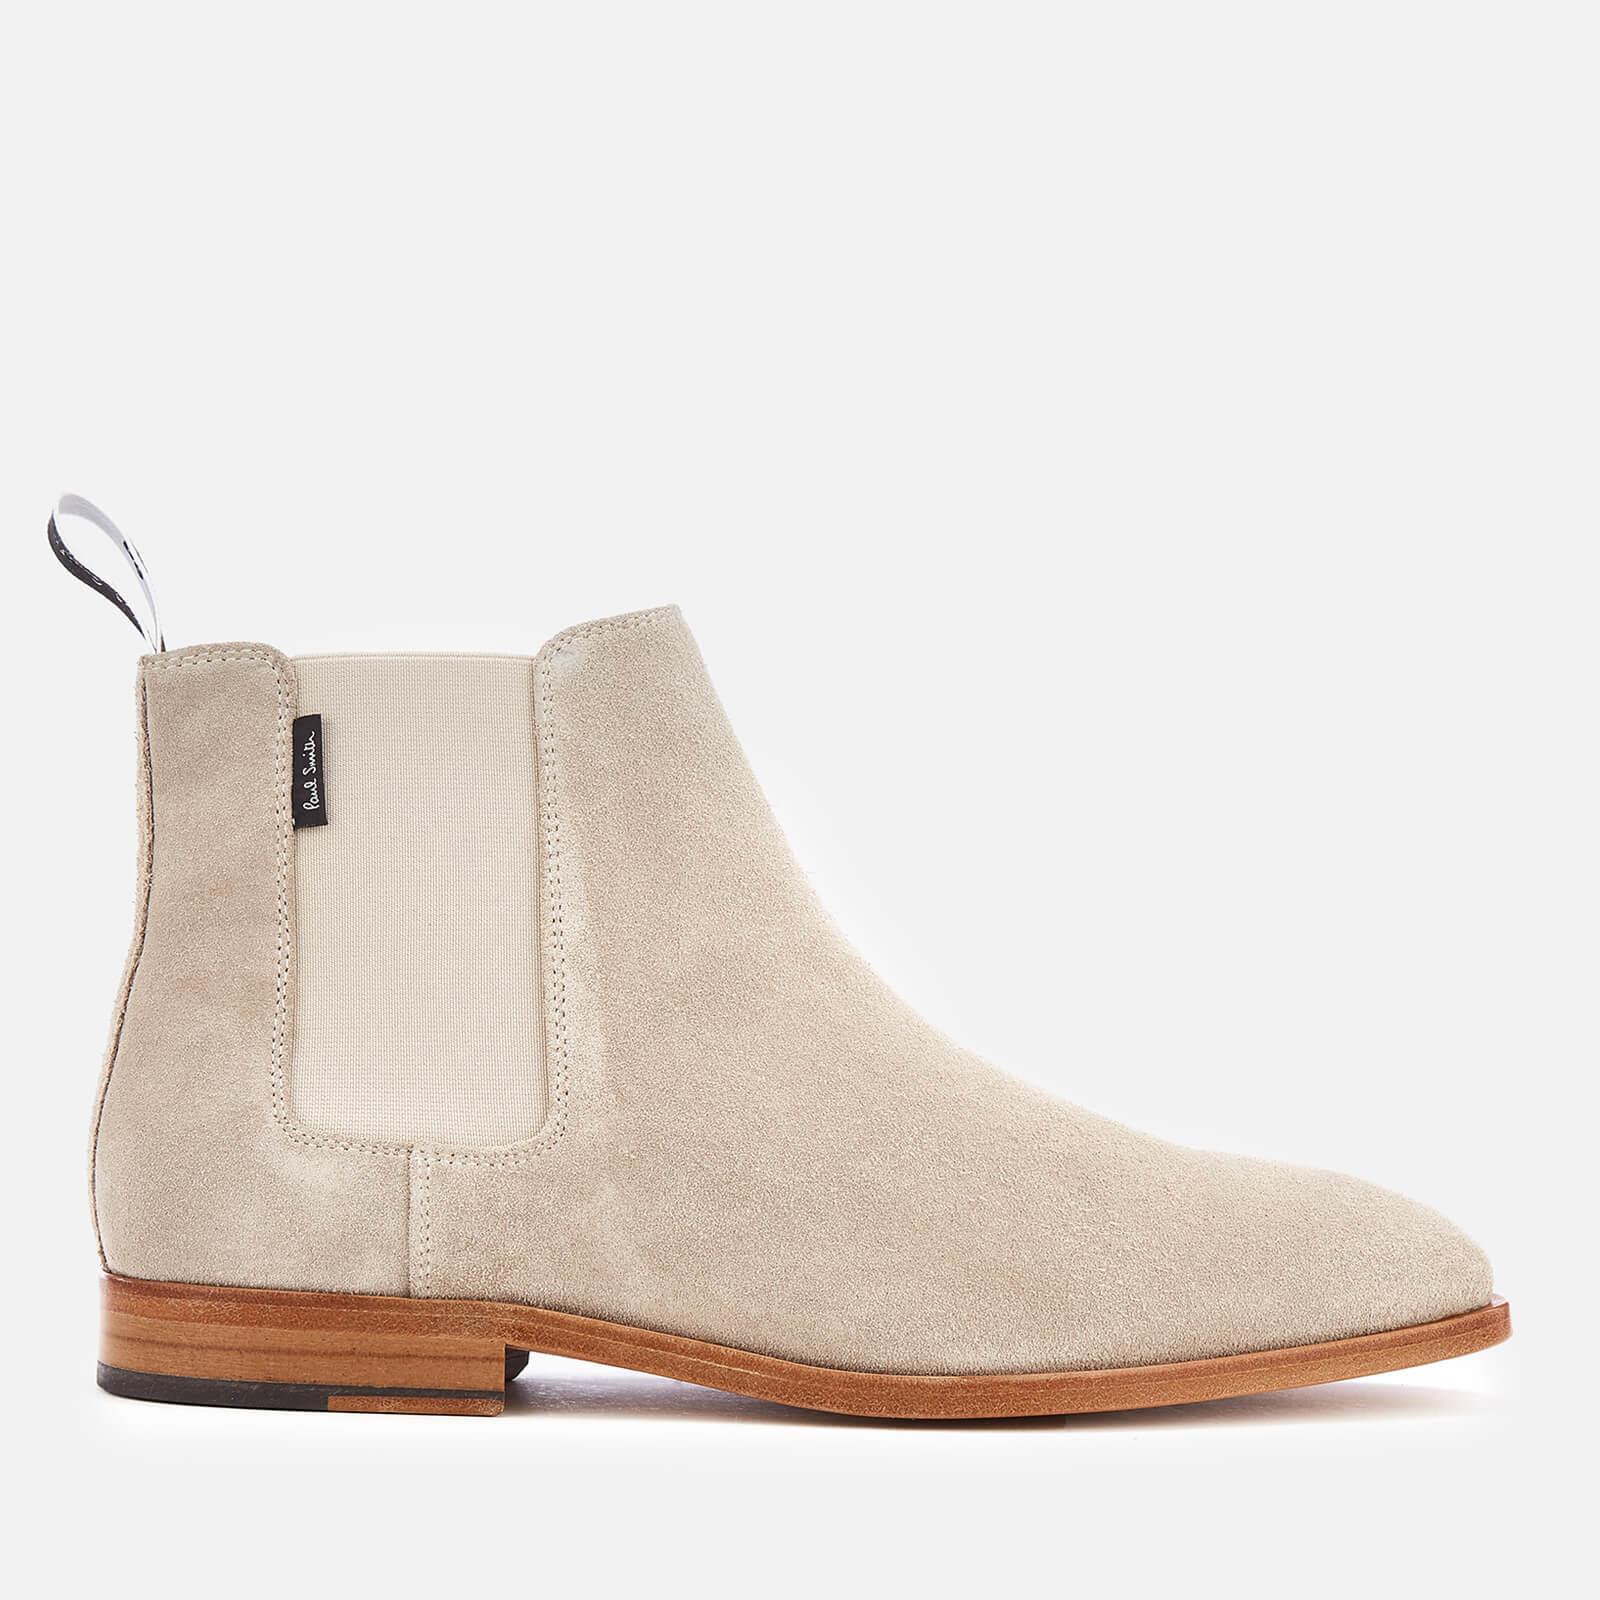 PS by Gerald Suede Chelsea Boots in Grey (Gray) for Men - Lyst